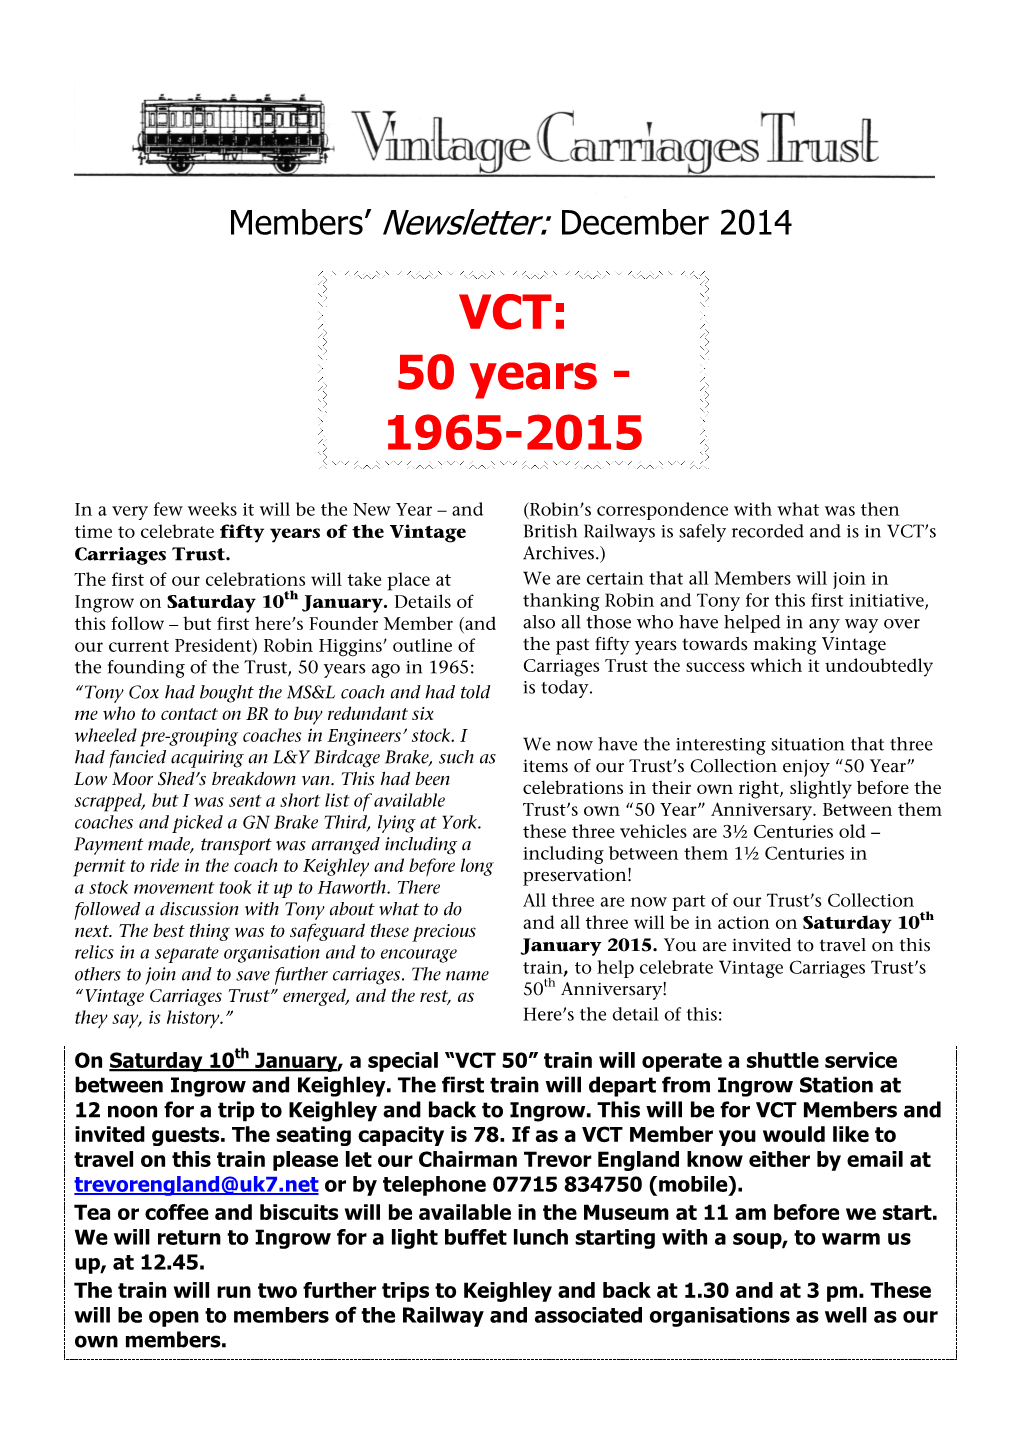 VCT: 50 Years - 1965-2015